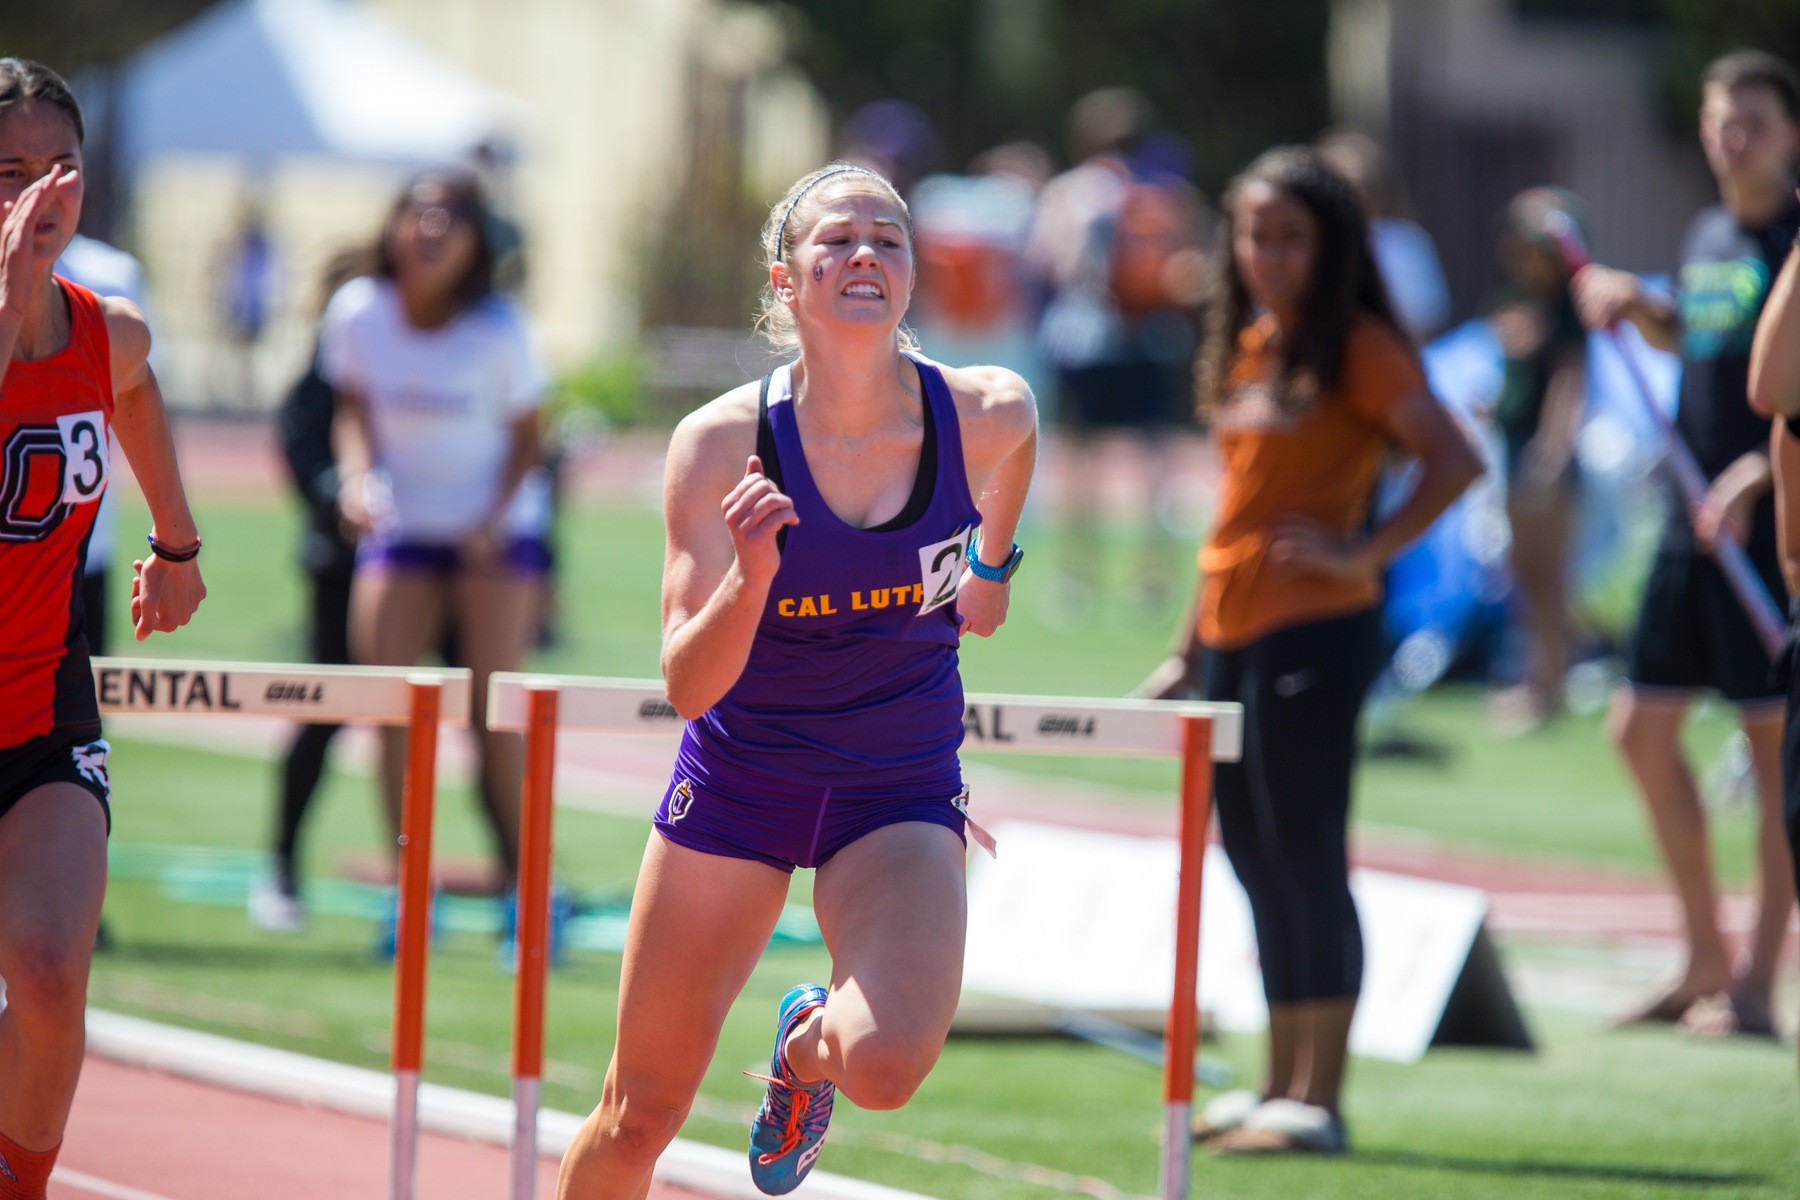 Rouse Takes Home Heptathlon Title at Redlands Qualifiers